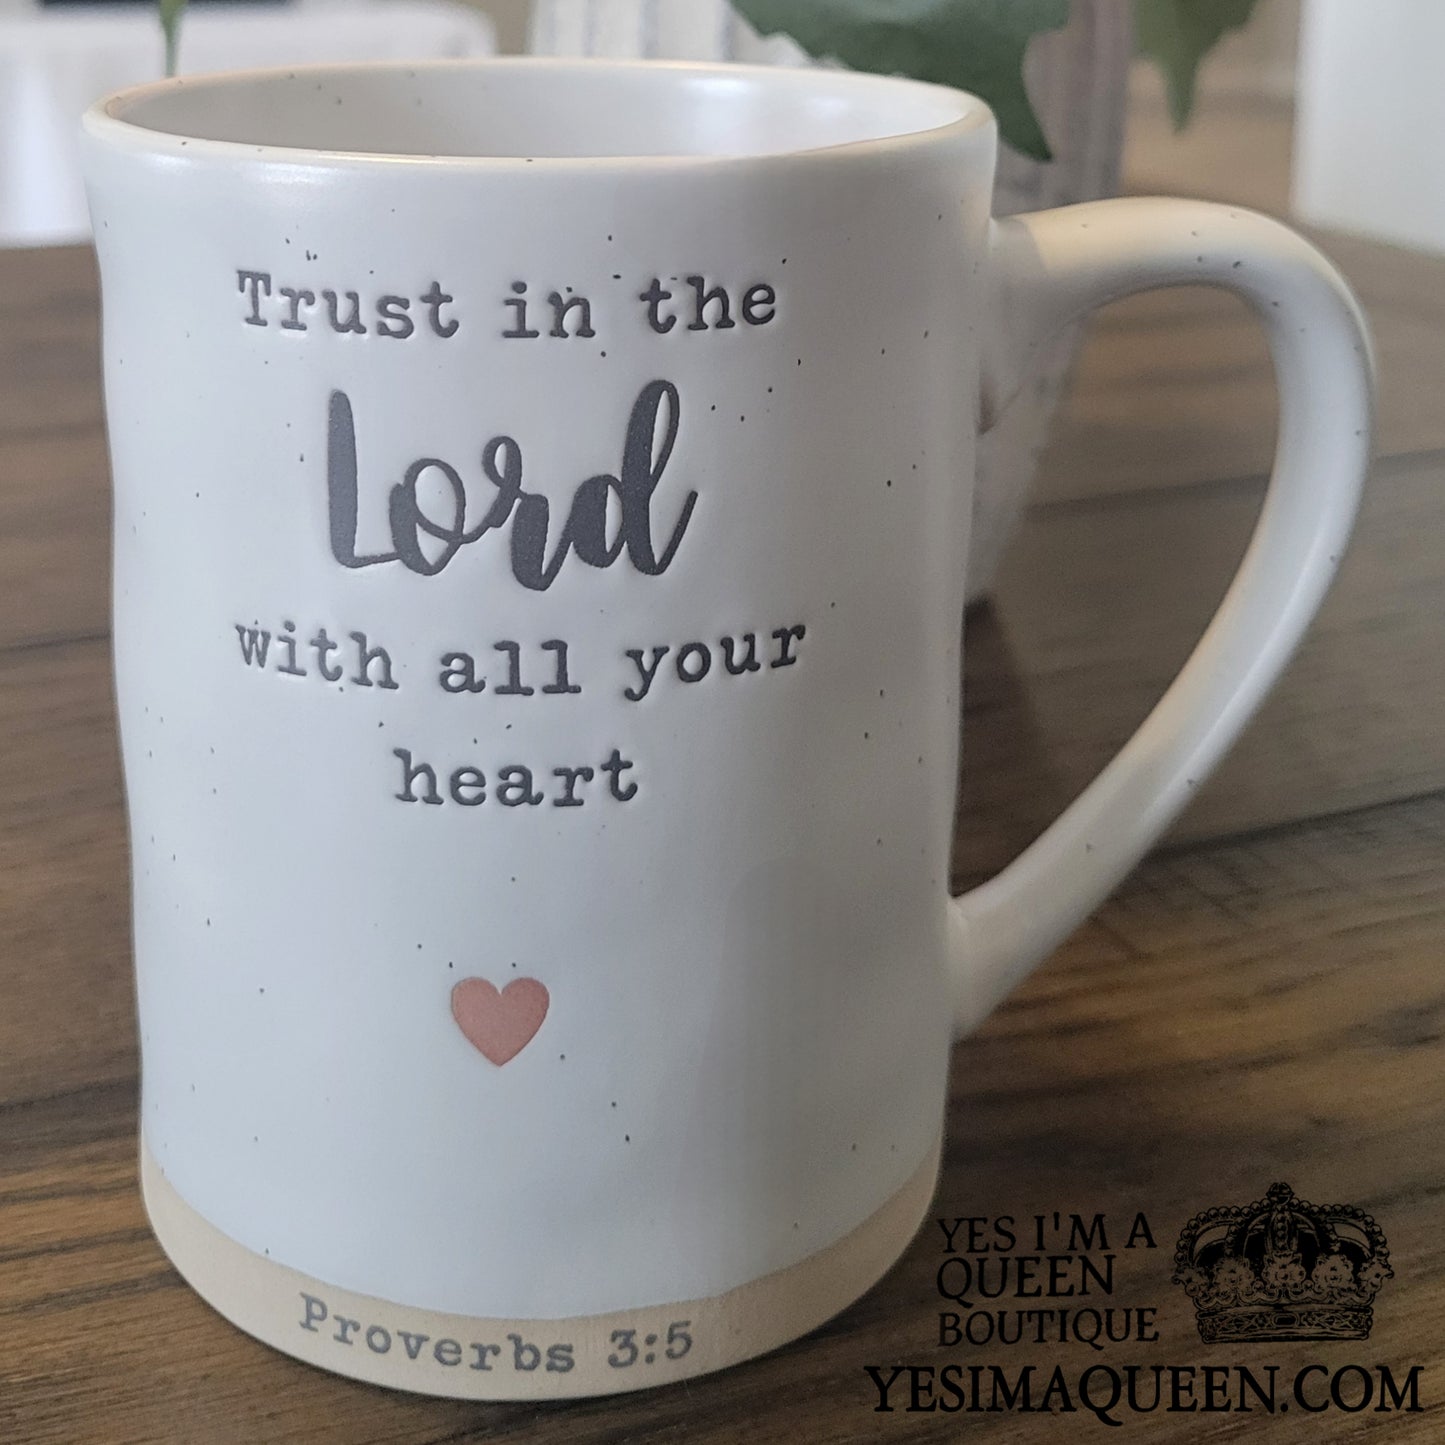 Trust in the Lord With all Your Heart Coffee Mug